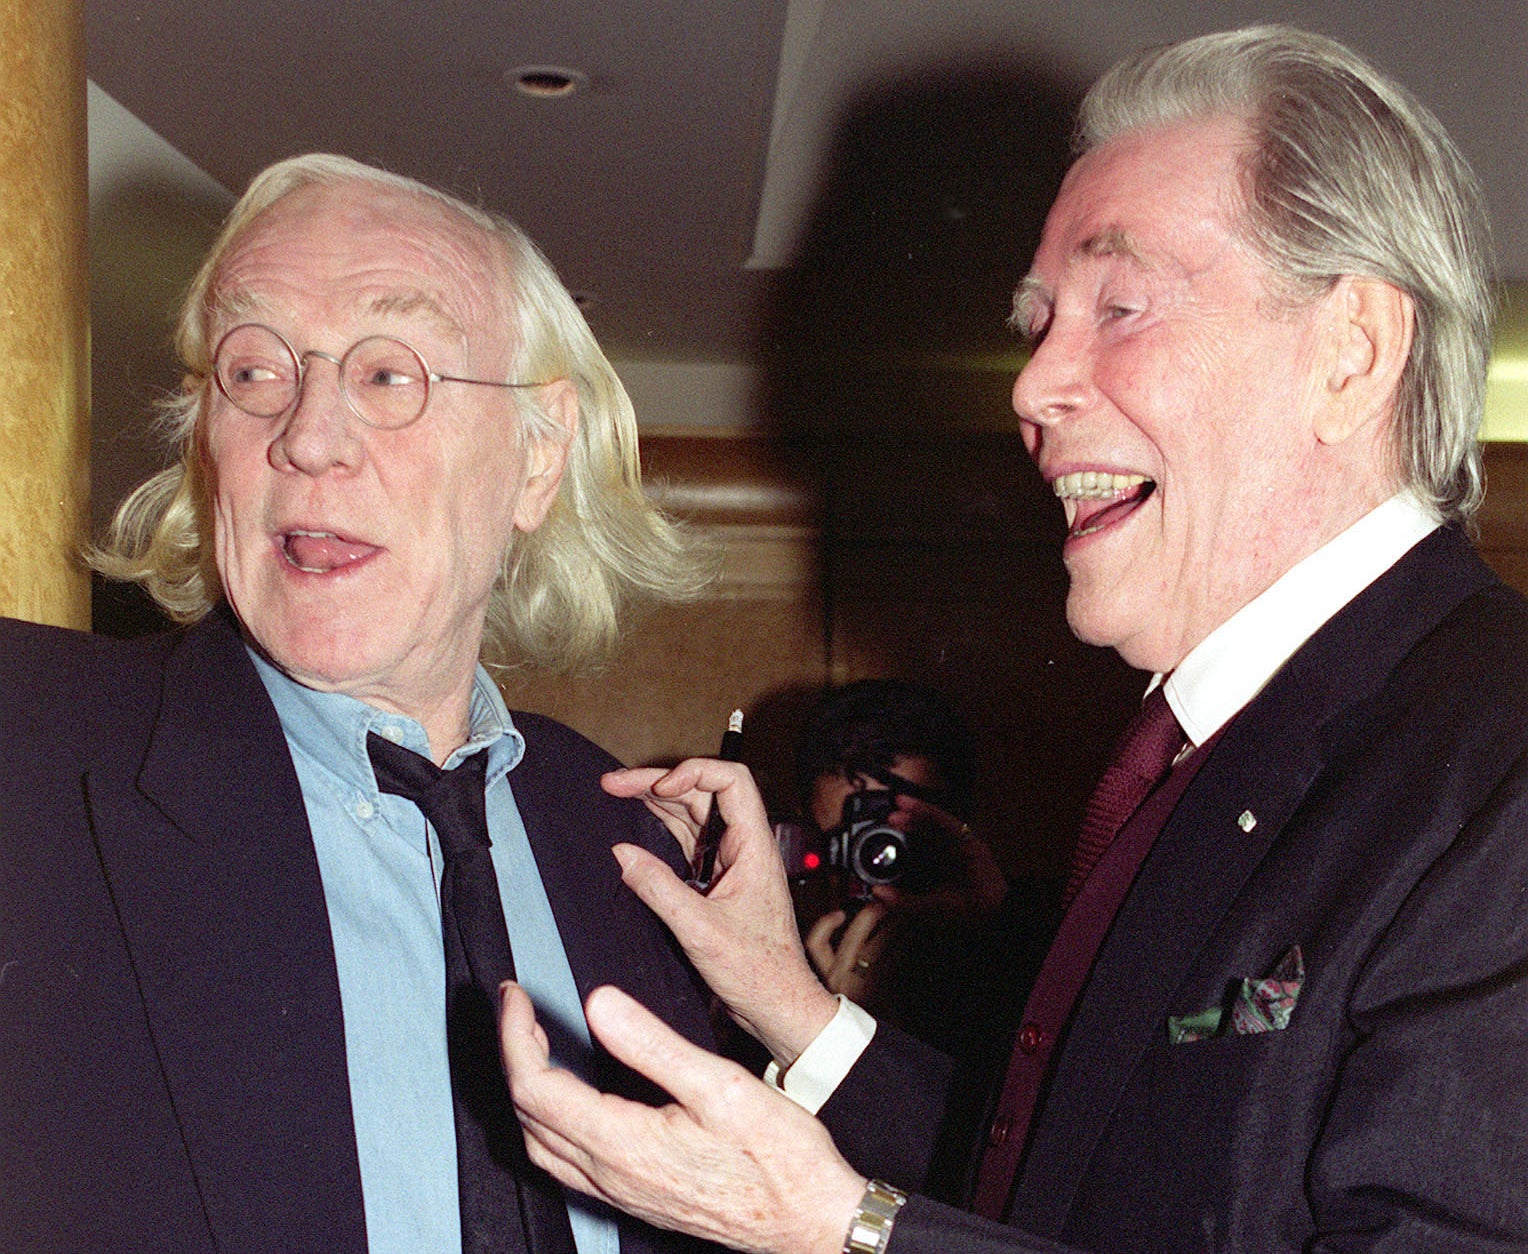 Peter and Richard laugh while at an event together